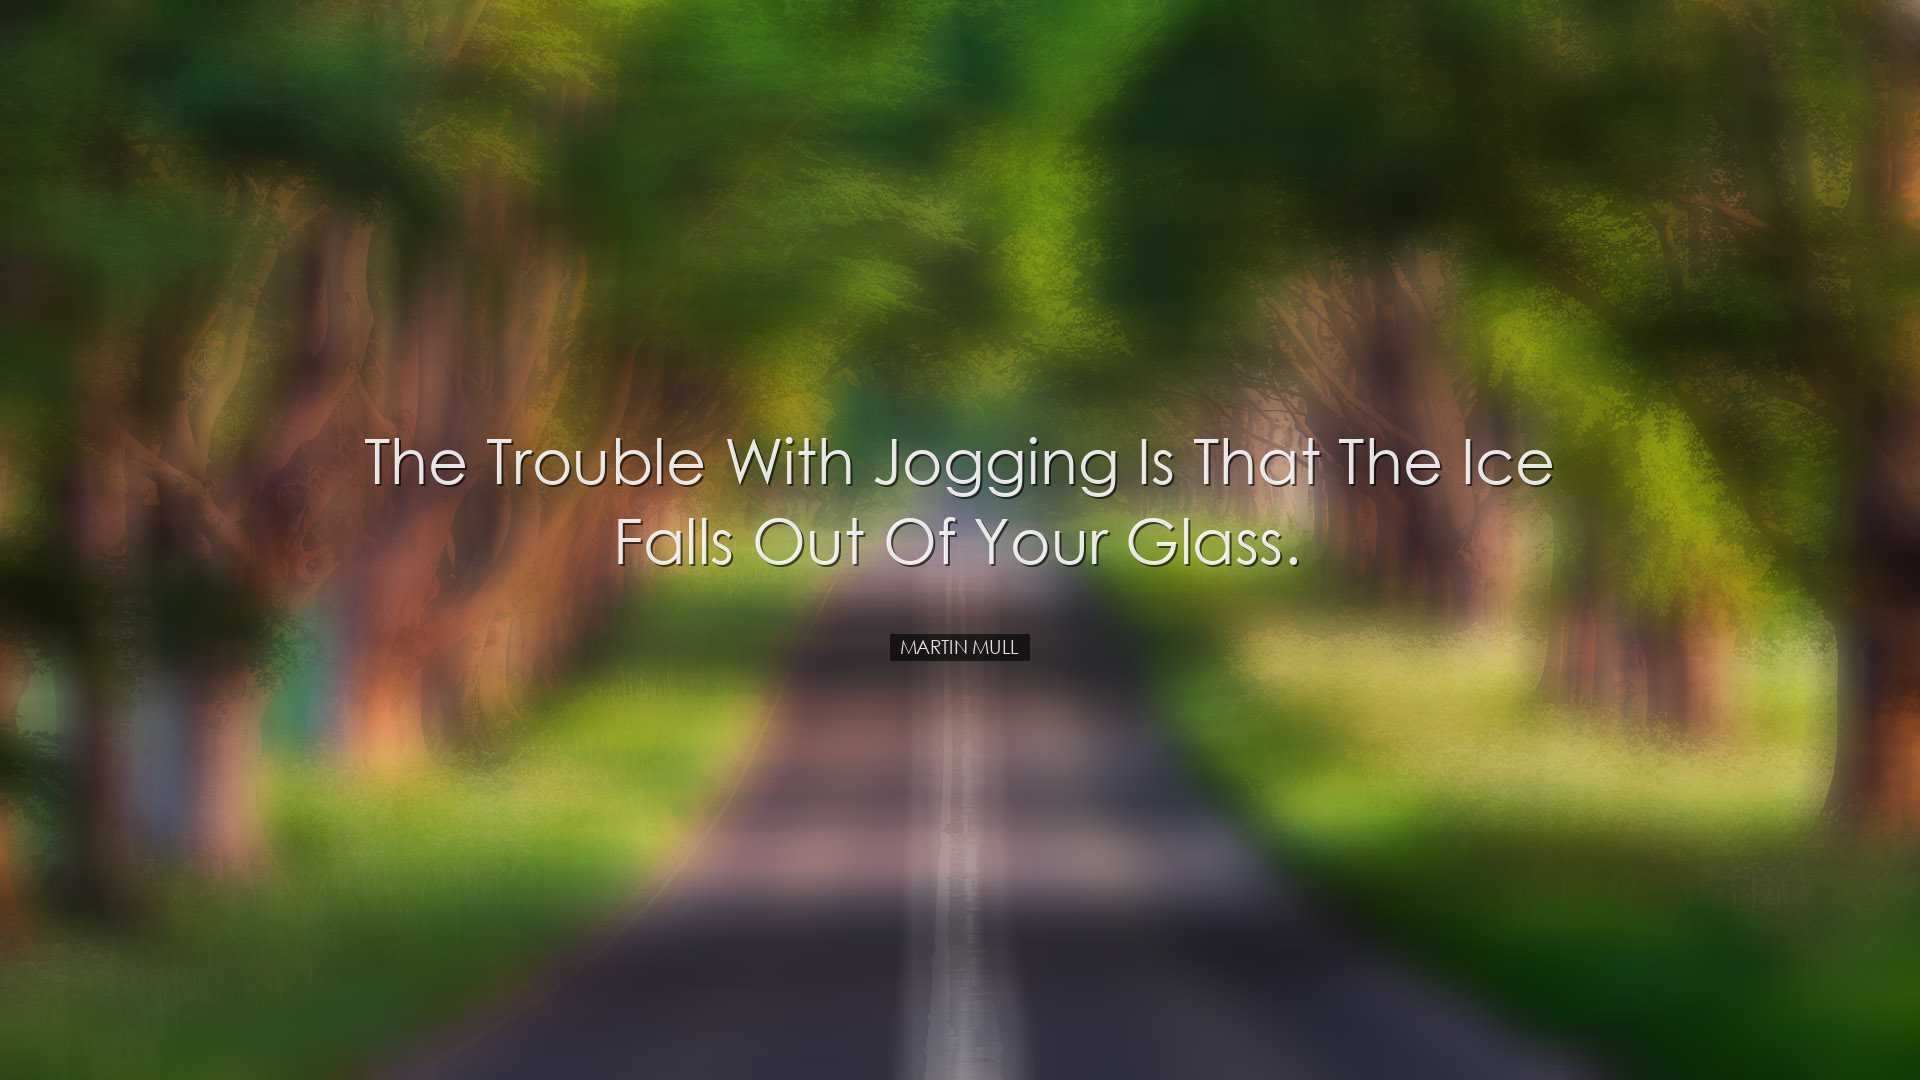 The trouble with jogging is that the ice falls out of your glass.